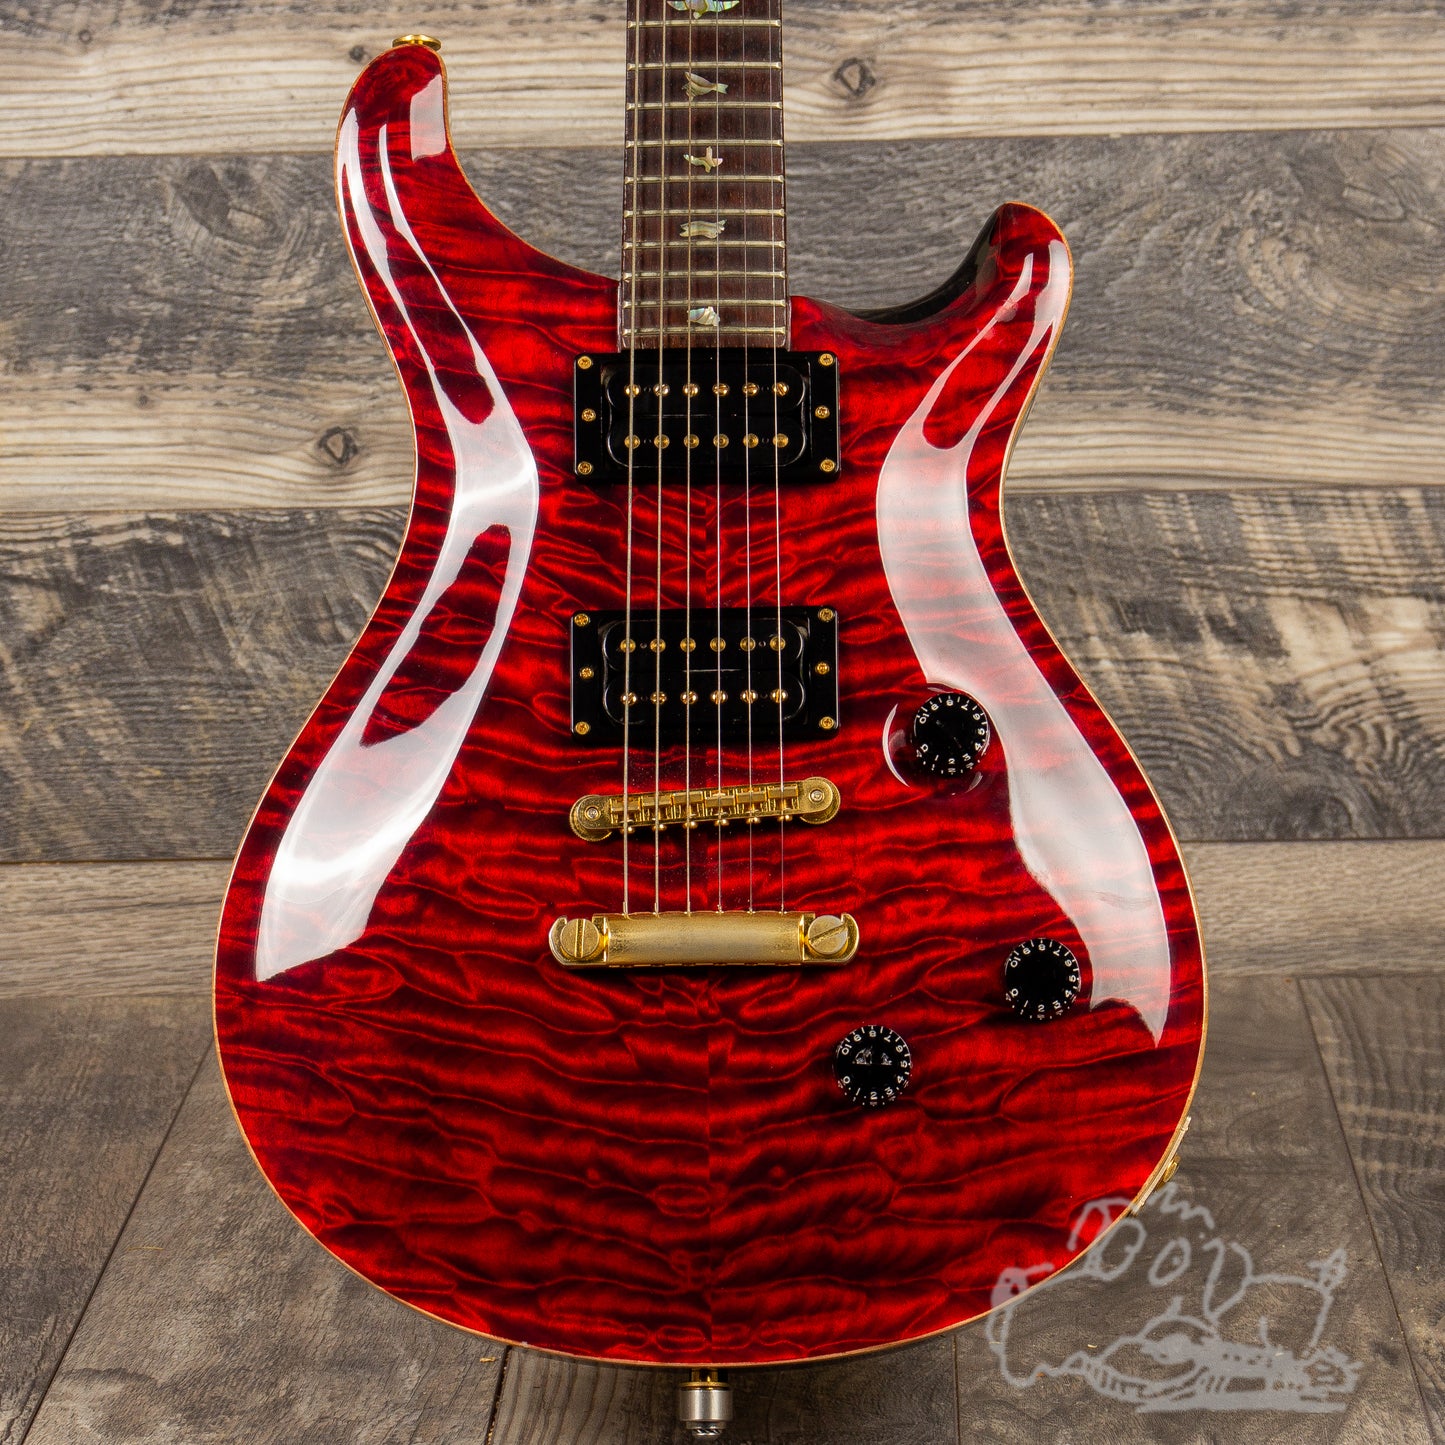 1991 PRS Limited Edition in Black Cherry with quilted maple top